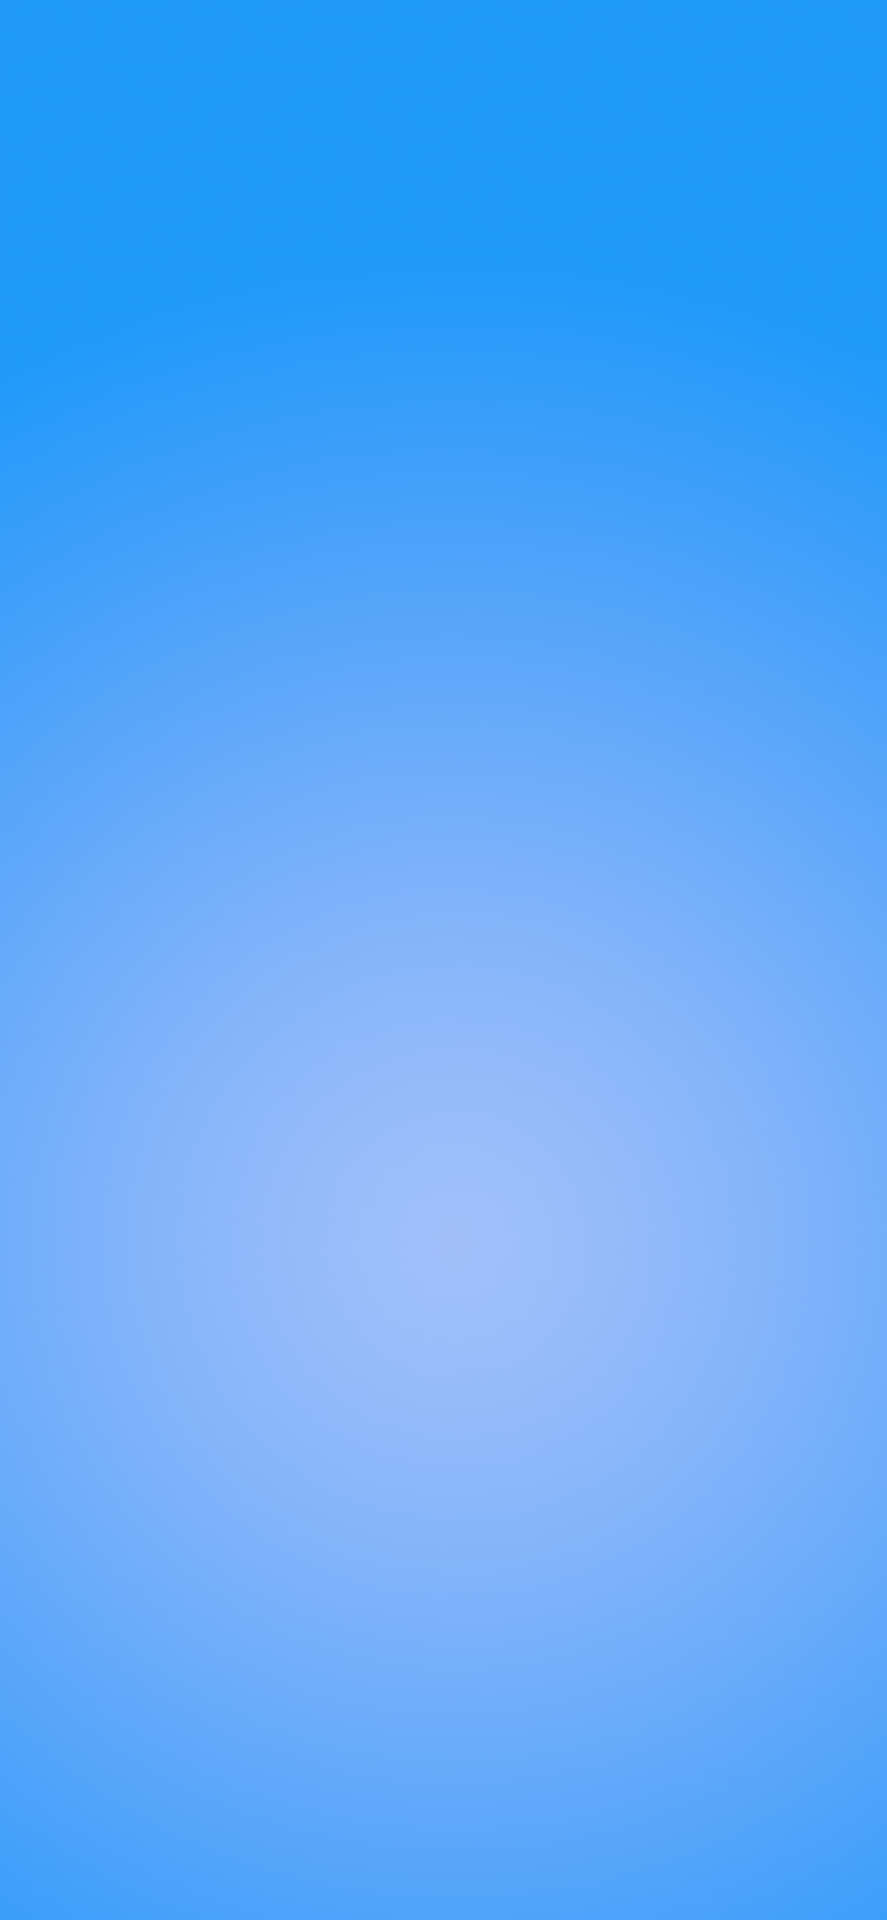 Steal the Show with Simple Blue iPhone Wallpaper